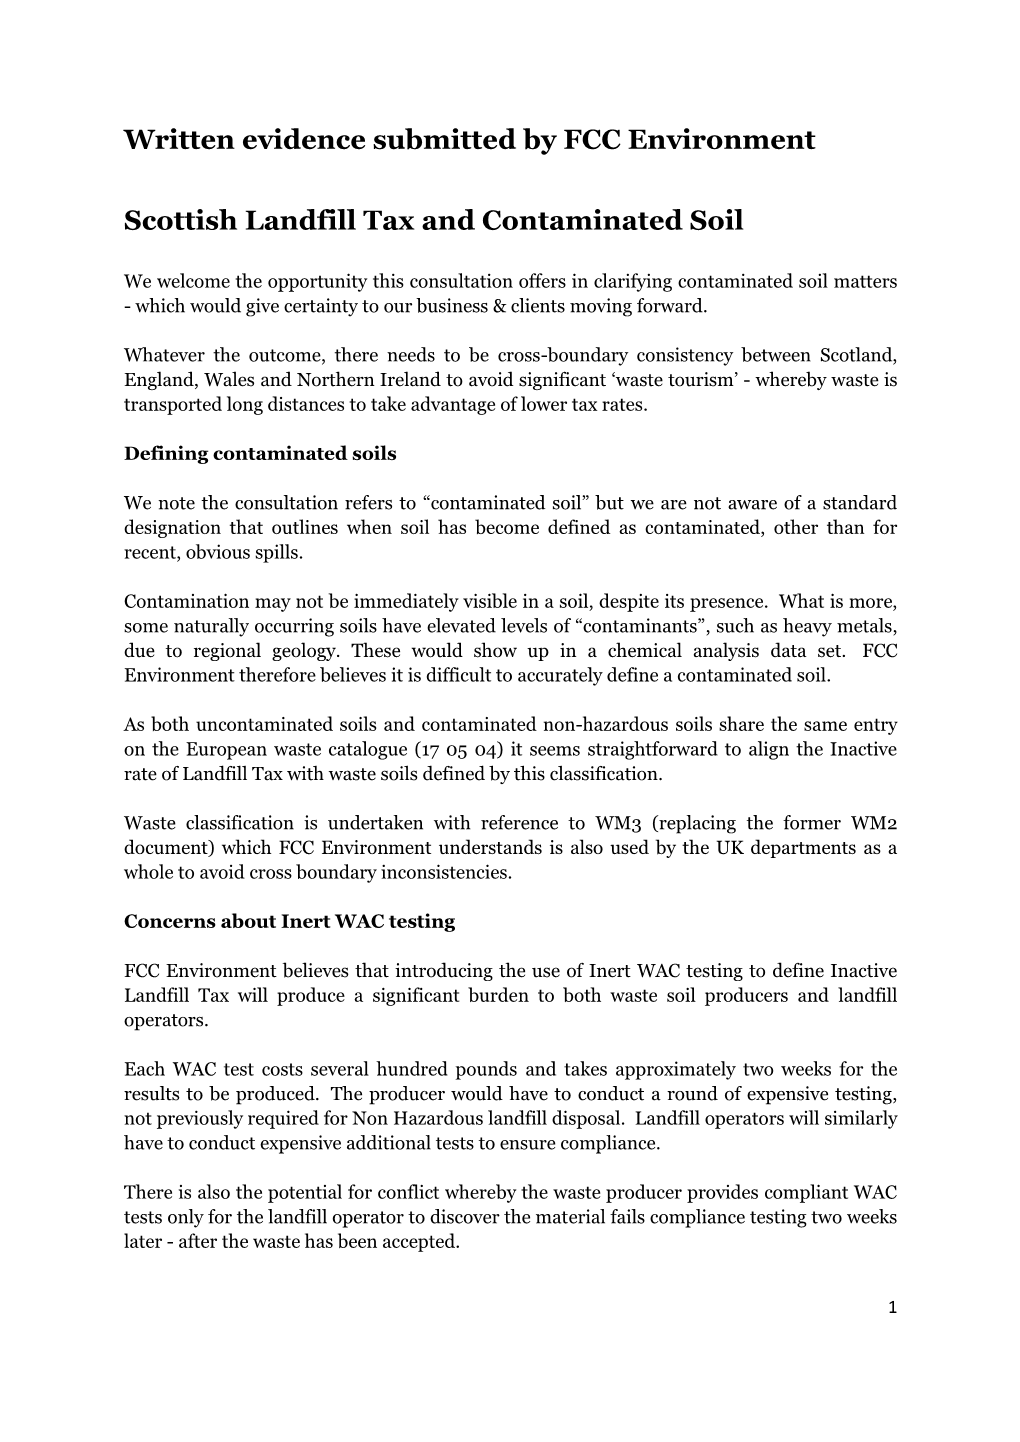 Written Evidence Submitted by FCC Environment Scottish Landfill Tax